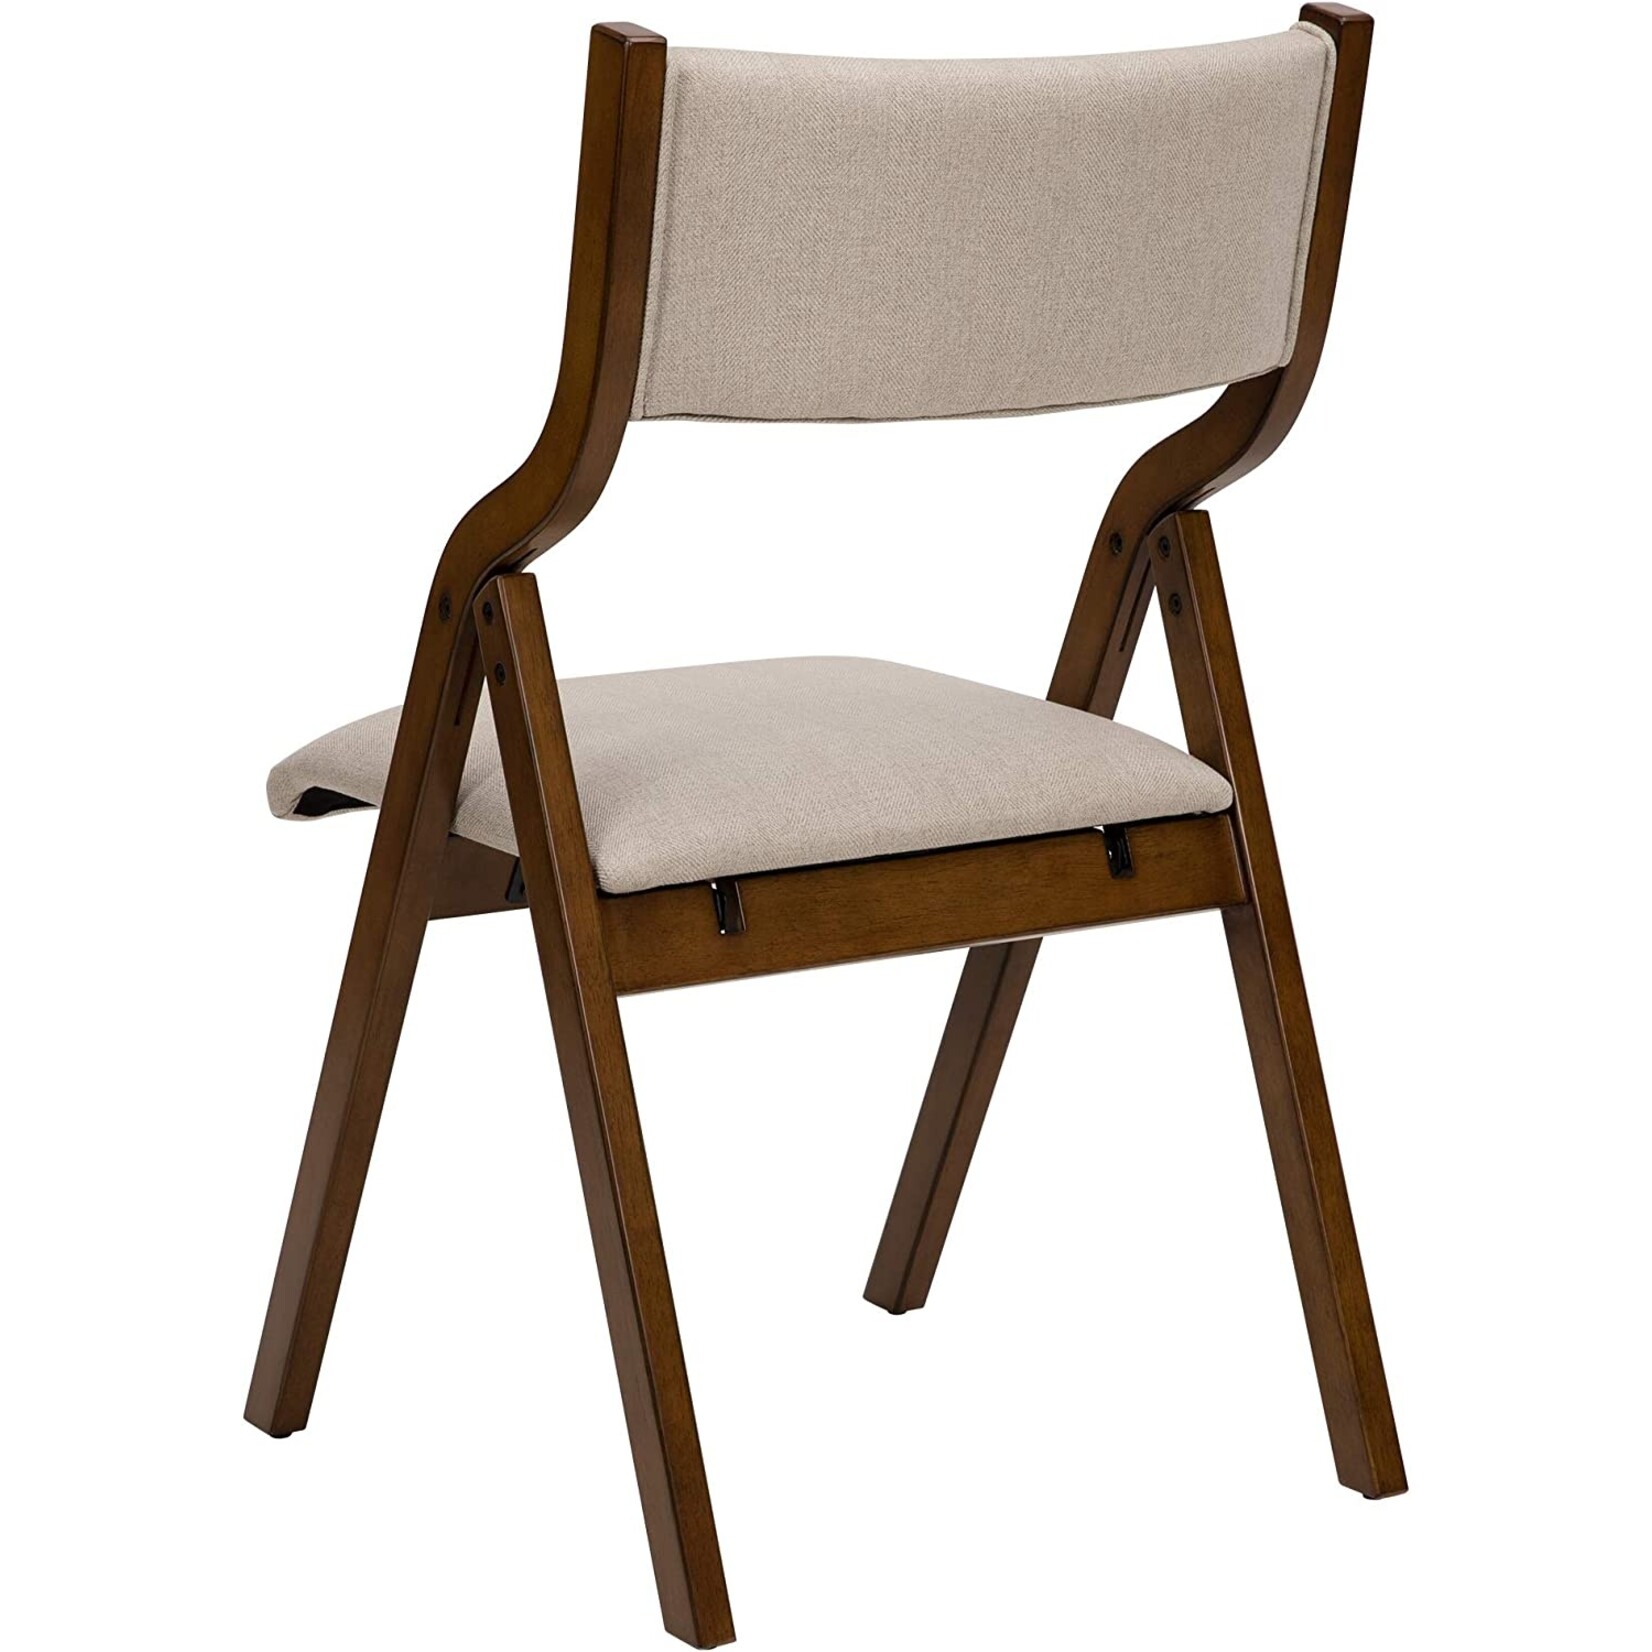 Nova Ball & Cast Set Of 2 Dining Room Chairs In TAUPE